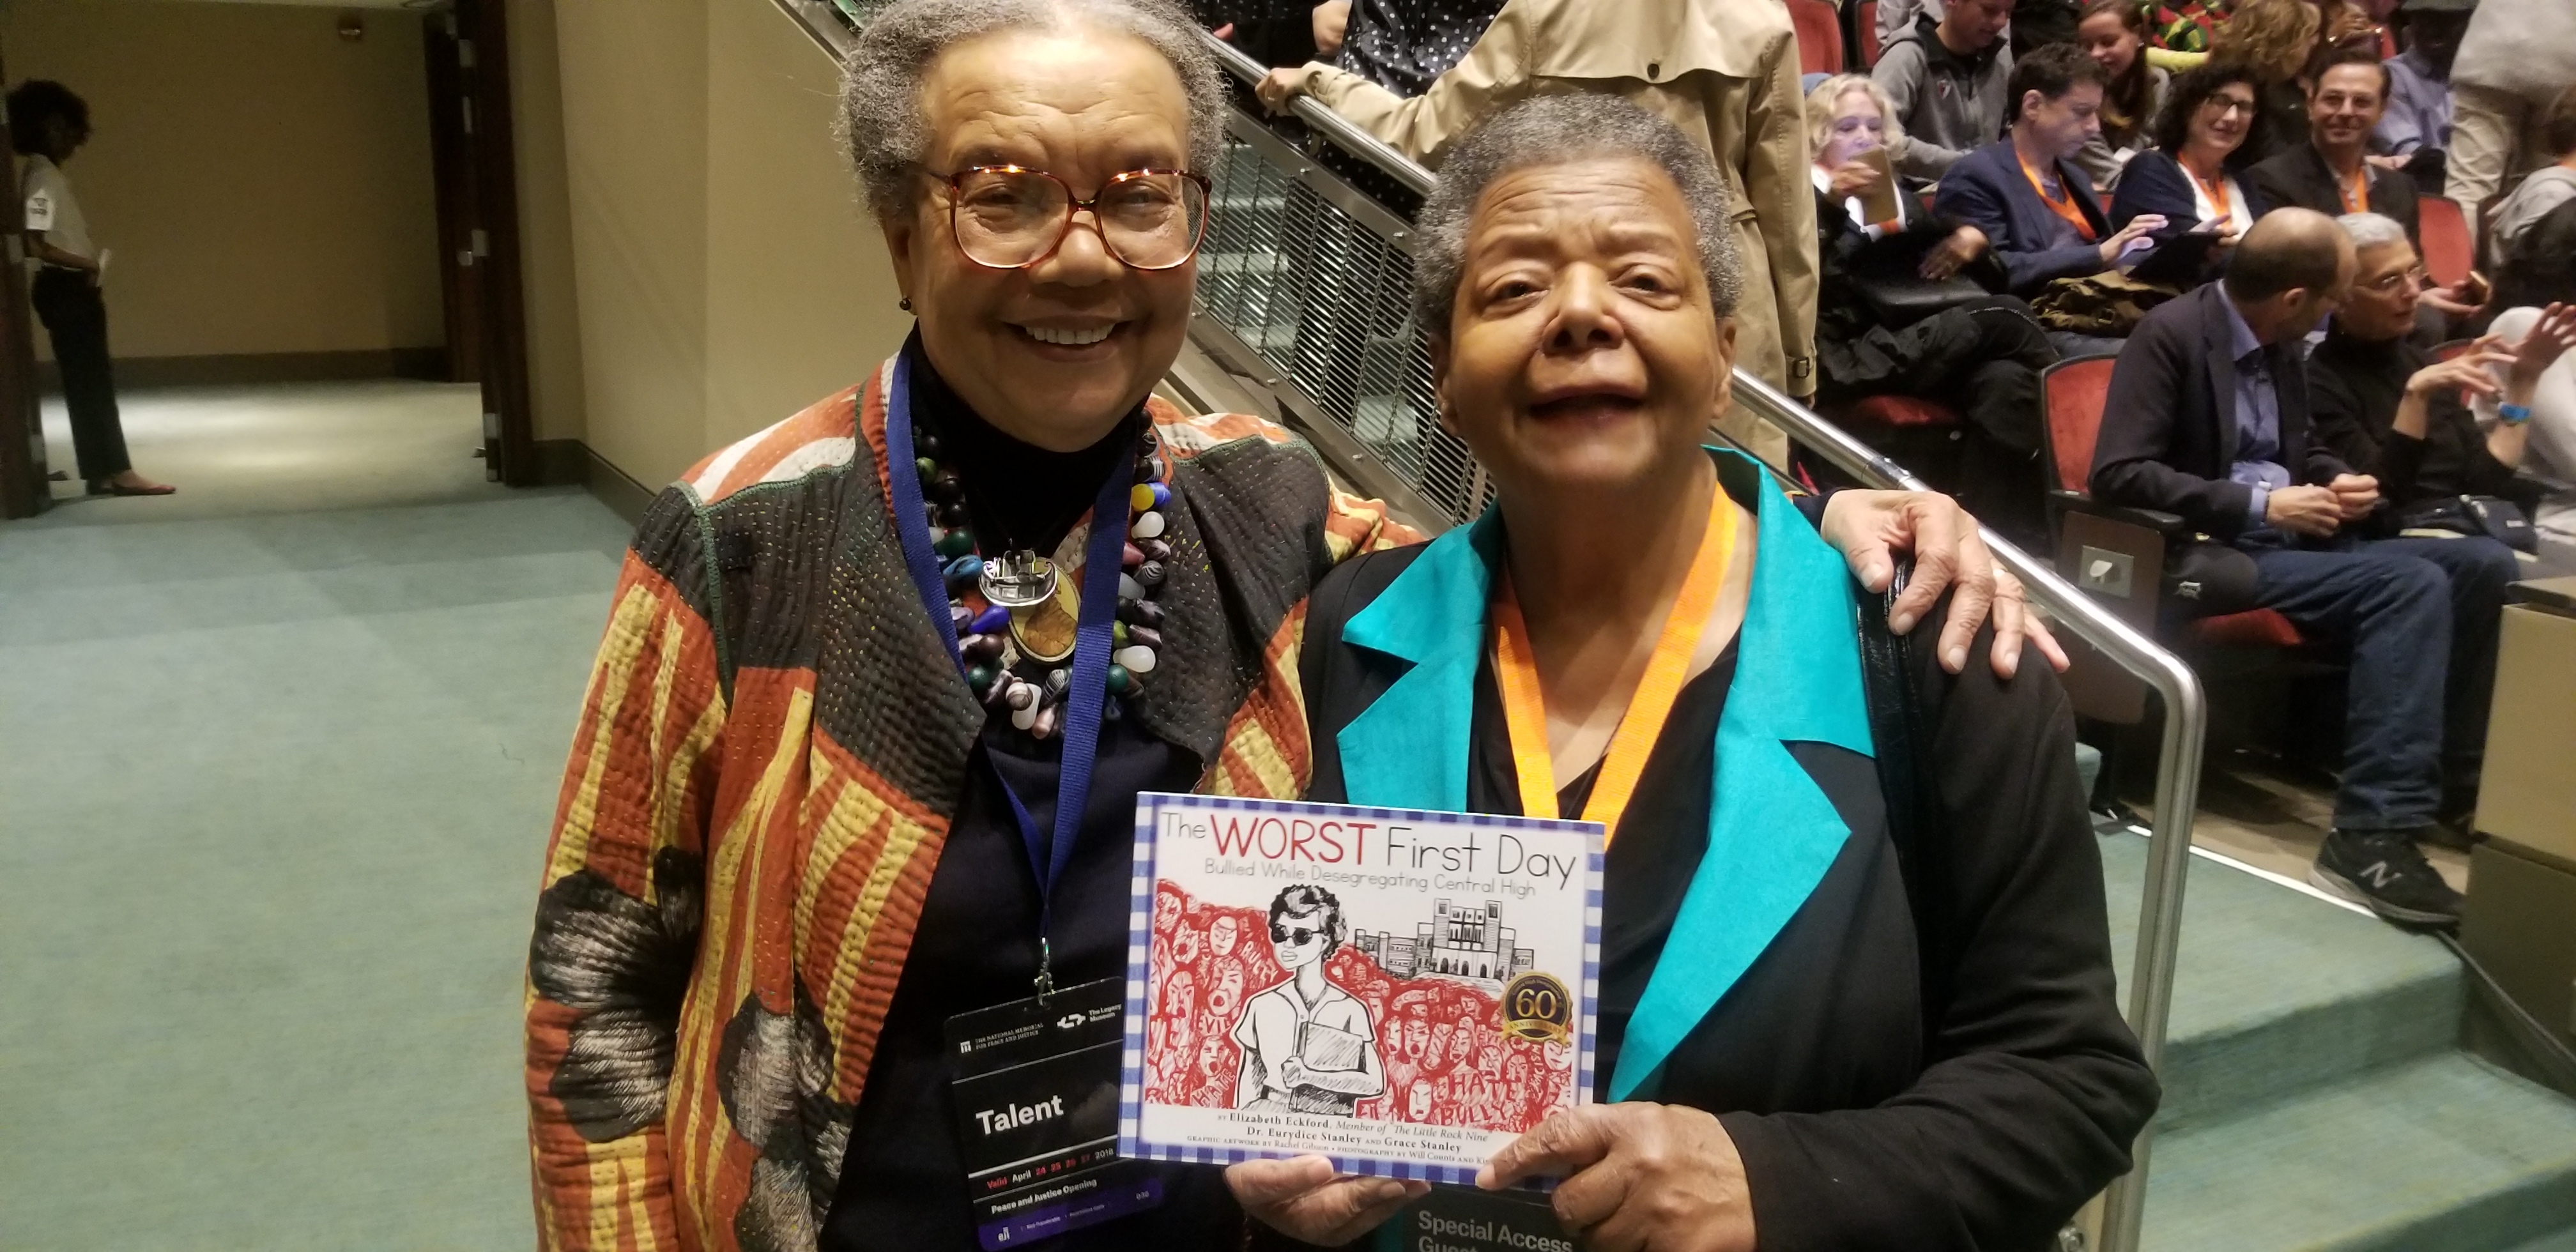 Elizabeth Eckford posing with another member of the Little Rock Nine